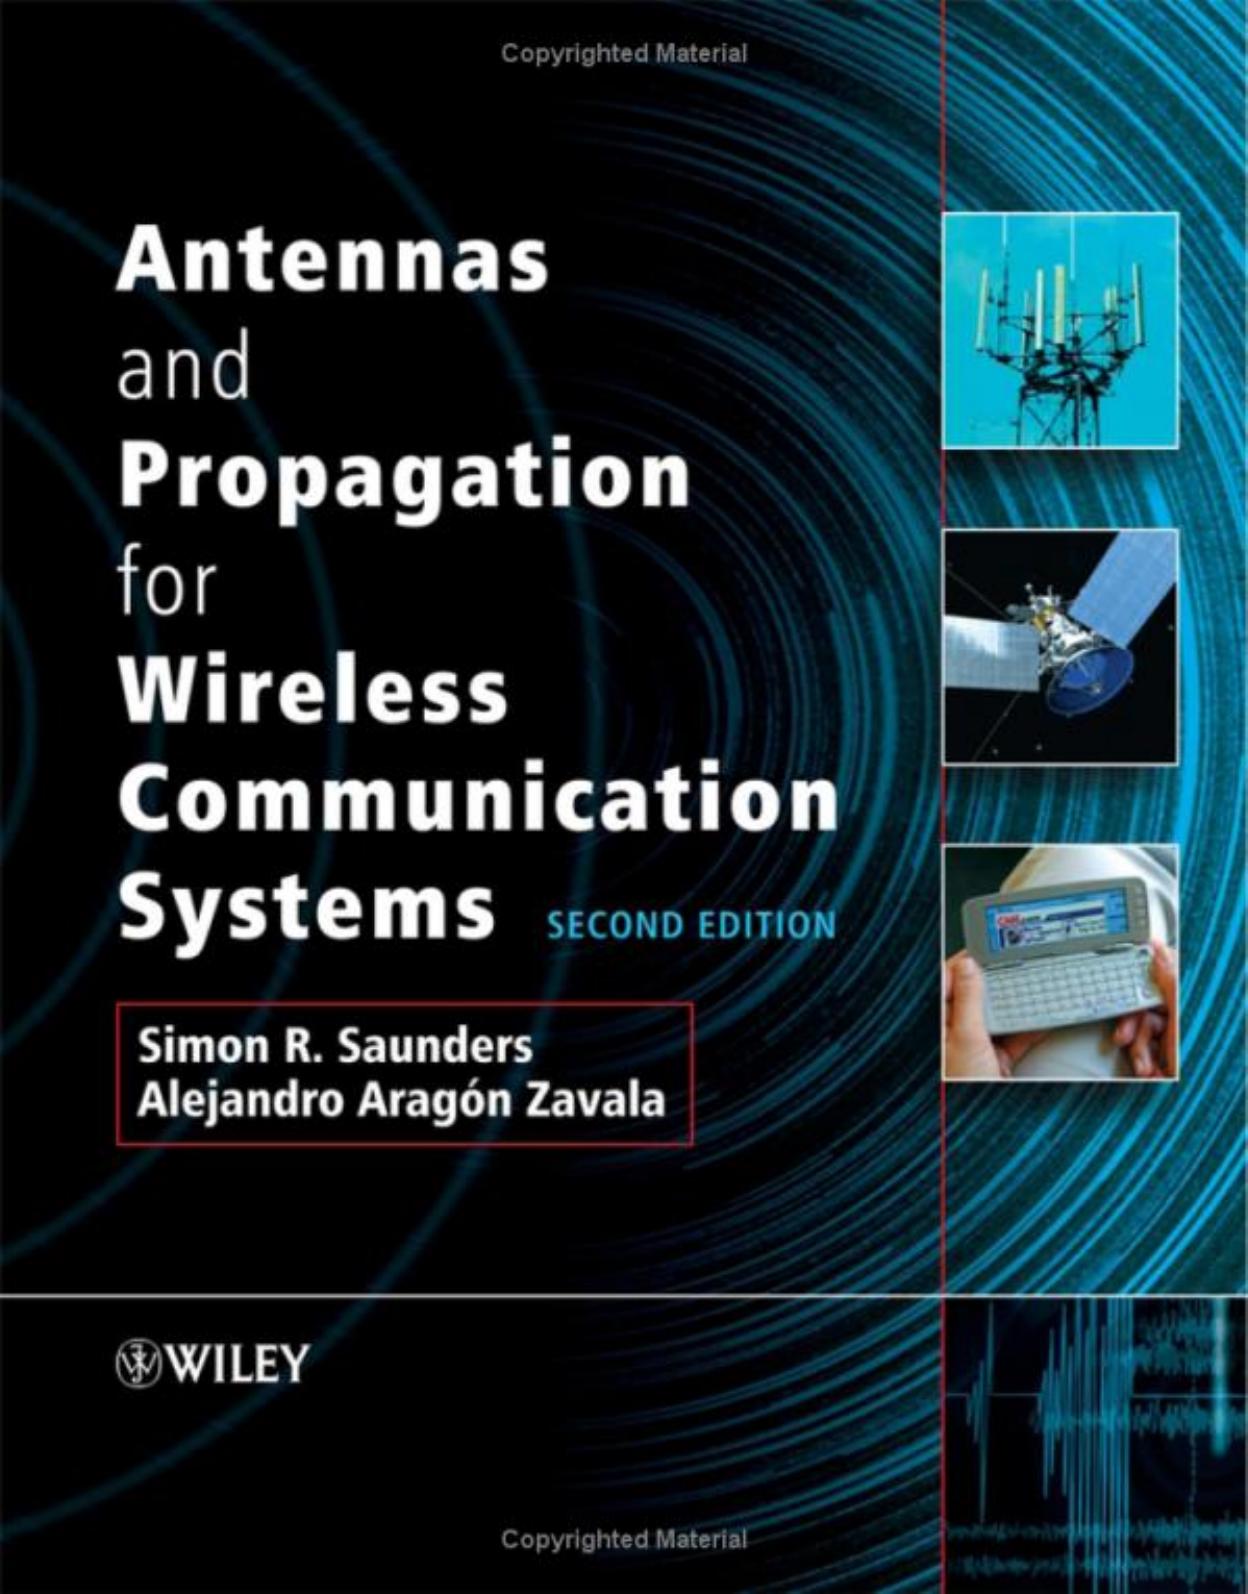 Antennas and Propagation for Wireless Communication Systems, 2nd Edition